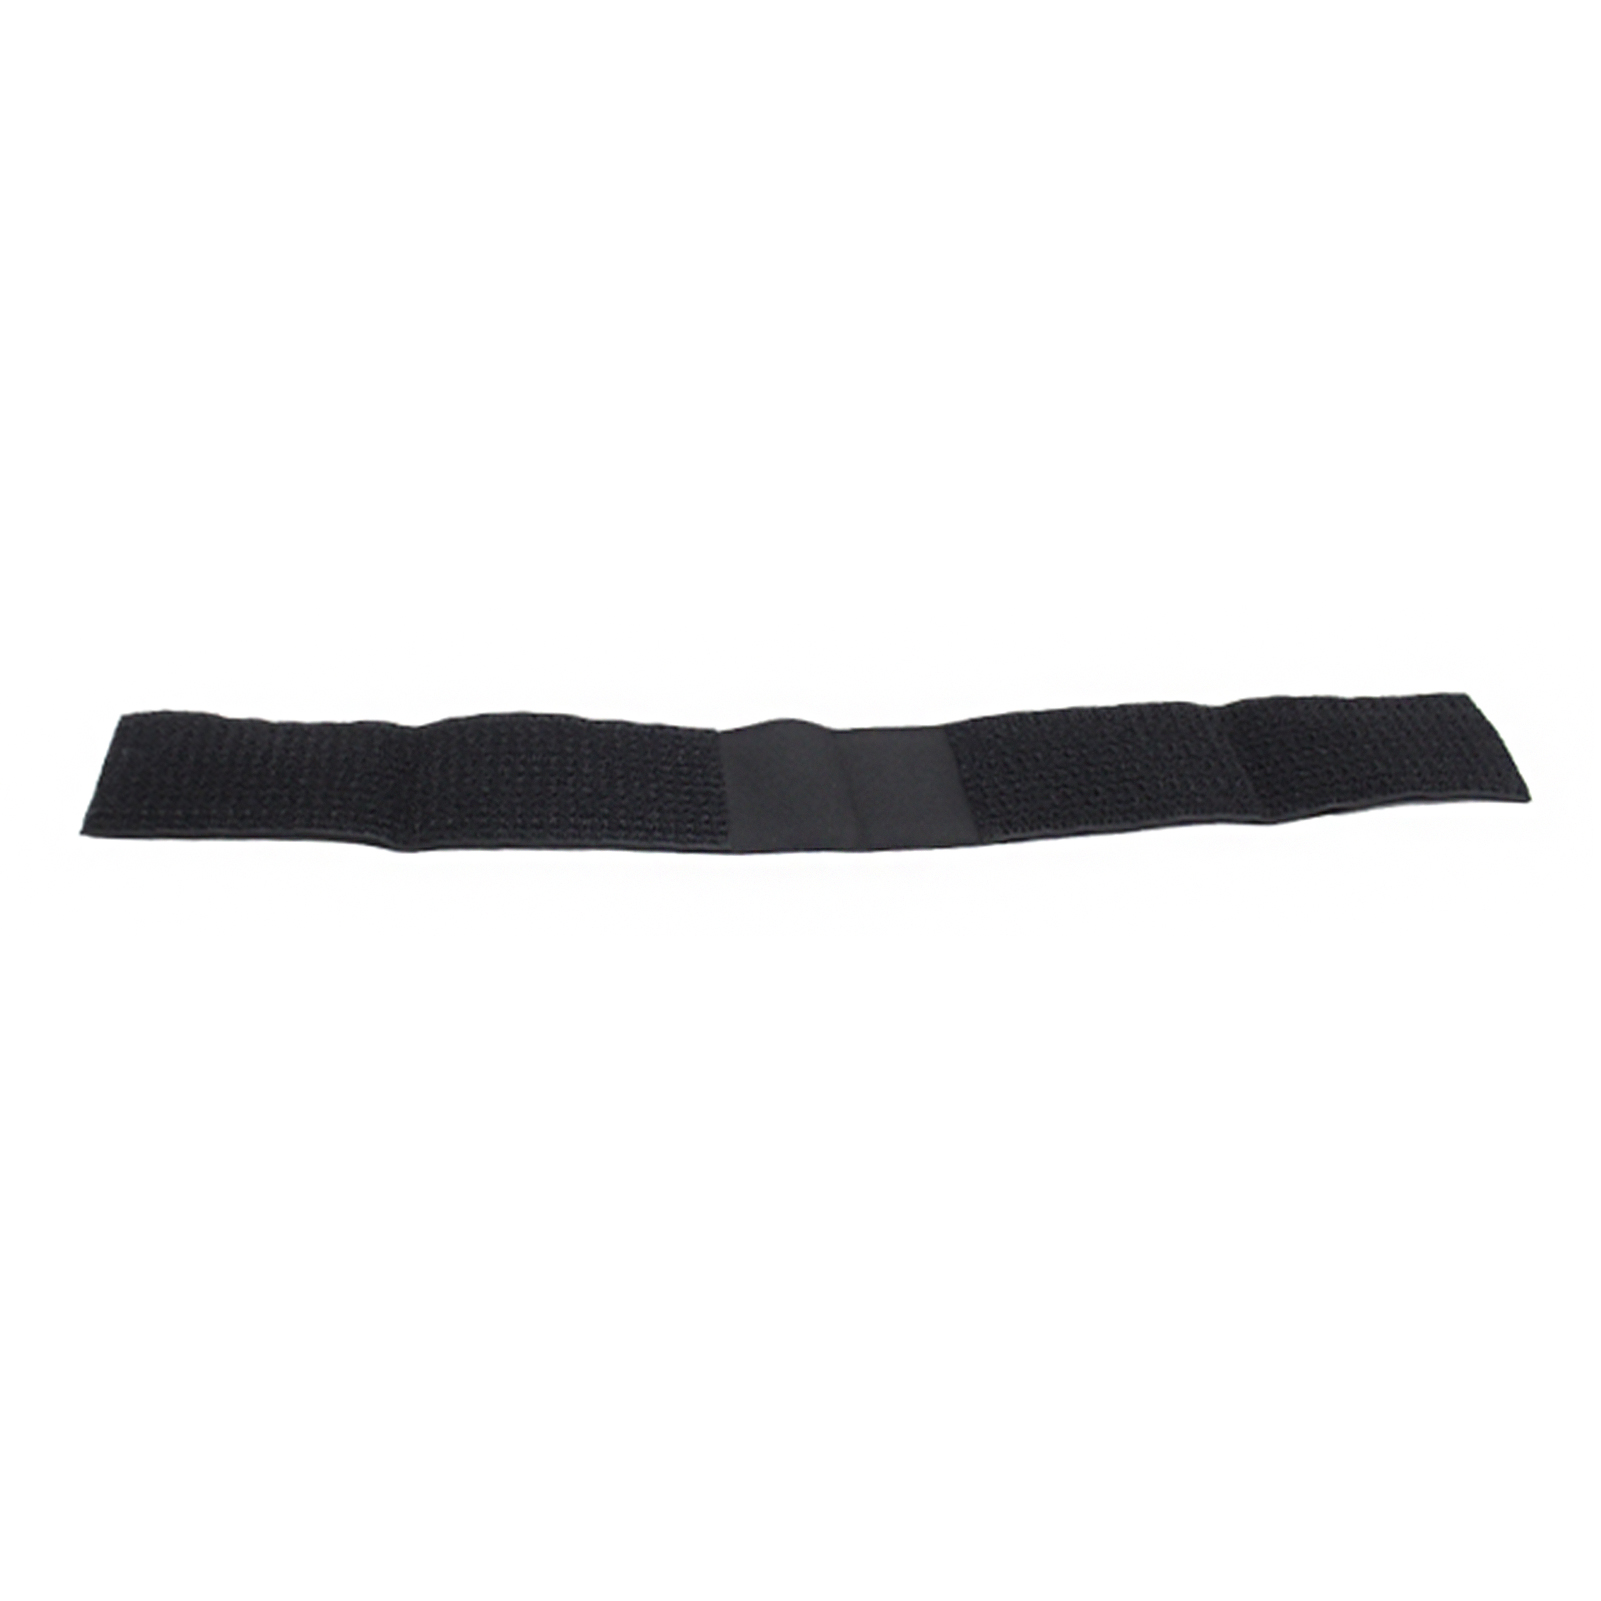 Durable Strap Fixed Easy Clean For Oculus Quest VR 2 Game Accessories Replacement Parts Elastic Band Soft Relieves Pressure